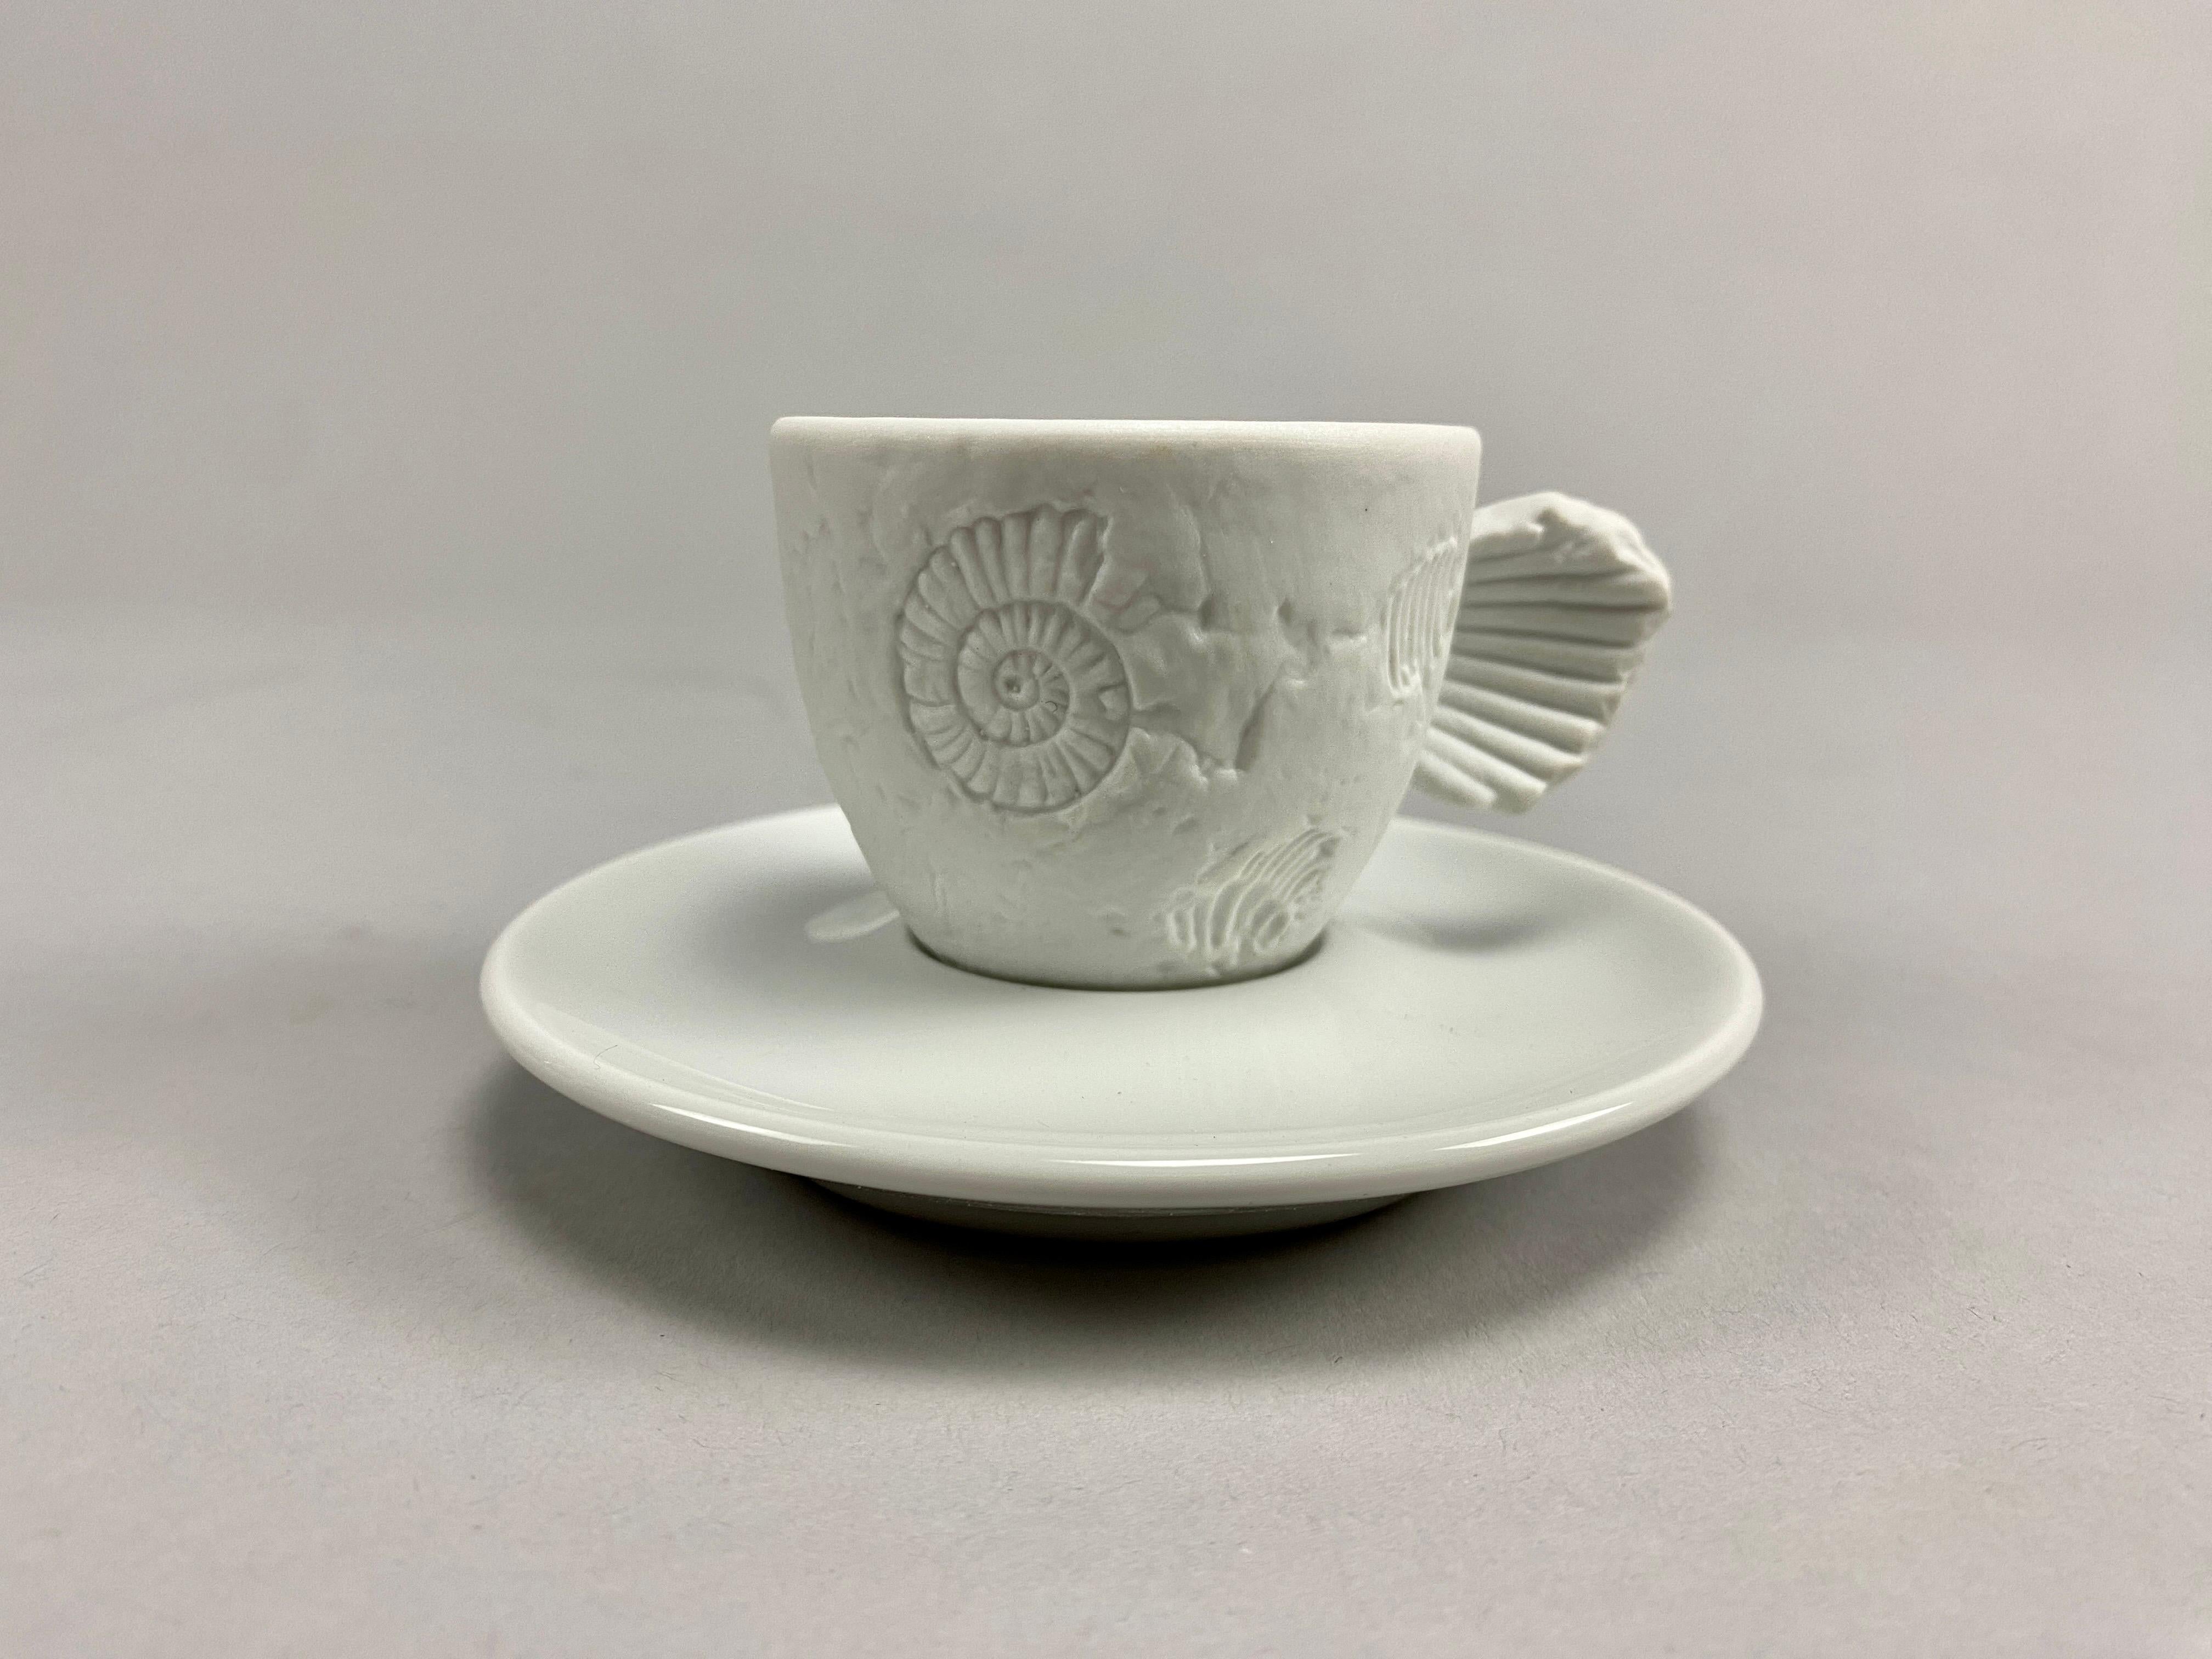 Indulge in a timeless blend of artistry and espresso with the exquisite mint 1997 Fossile Espresso cup from the Artist Cups Espresso Tazzine D’Autore Illy Collection. Designed by the visionary Paolo Rossetti, this cup is not just a vessel for your